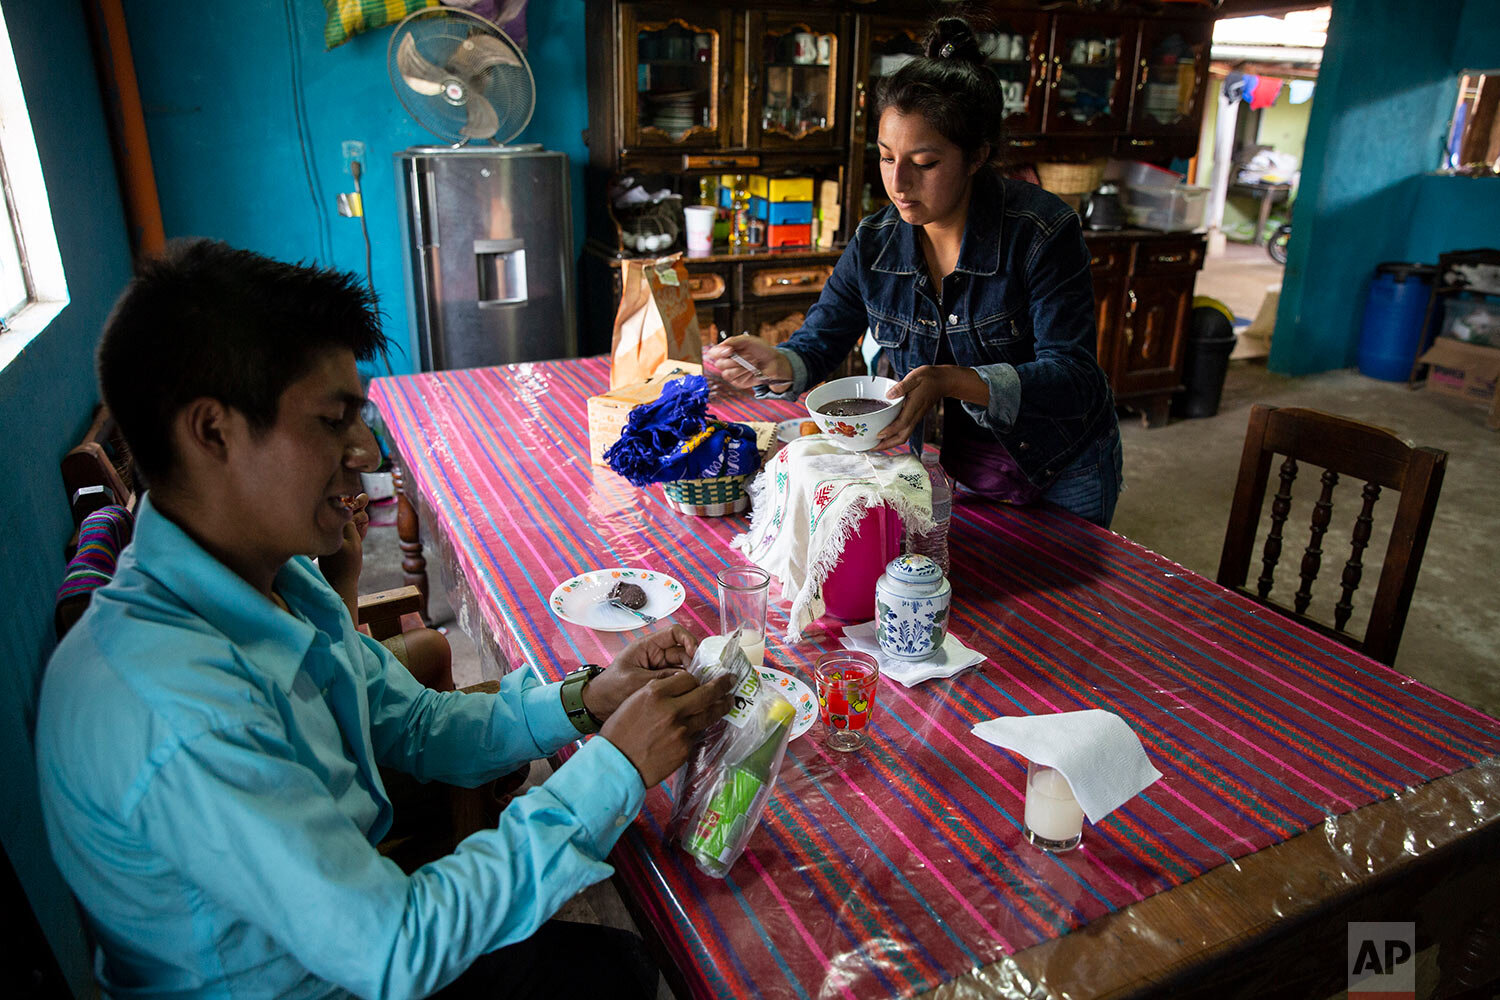  Teacher Gerardo Ixcoy and his wife Yessika Lopez prepare to have lunch in their home in Santa Cruz del Quiche, Guatemala, Wednesday, July 15, 2020. "One day the mother of a student told me they didn't have food," Ixcoy said. "When class ended and I 